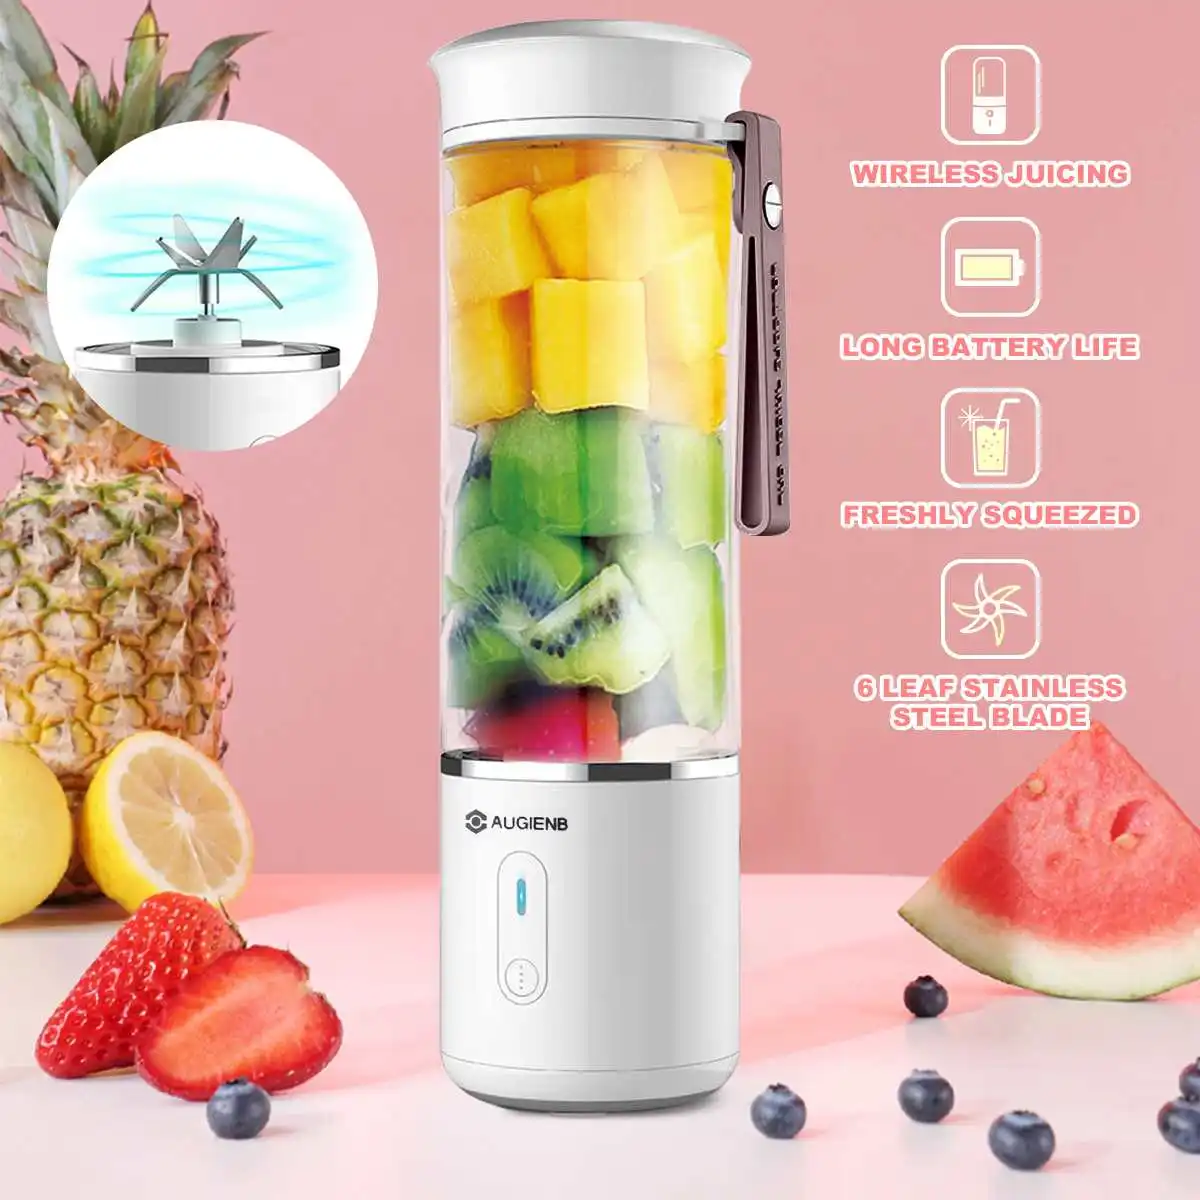 

AUGIENB 500ml Electric Fruit Juicer Glass Mini Portable Handheld Smoothie Maker Blenders Mixer USB Rechargeable for Home Travel